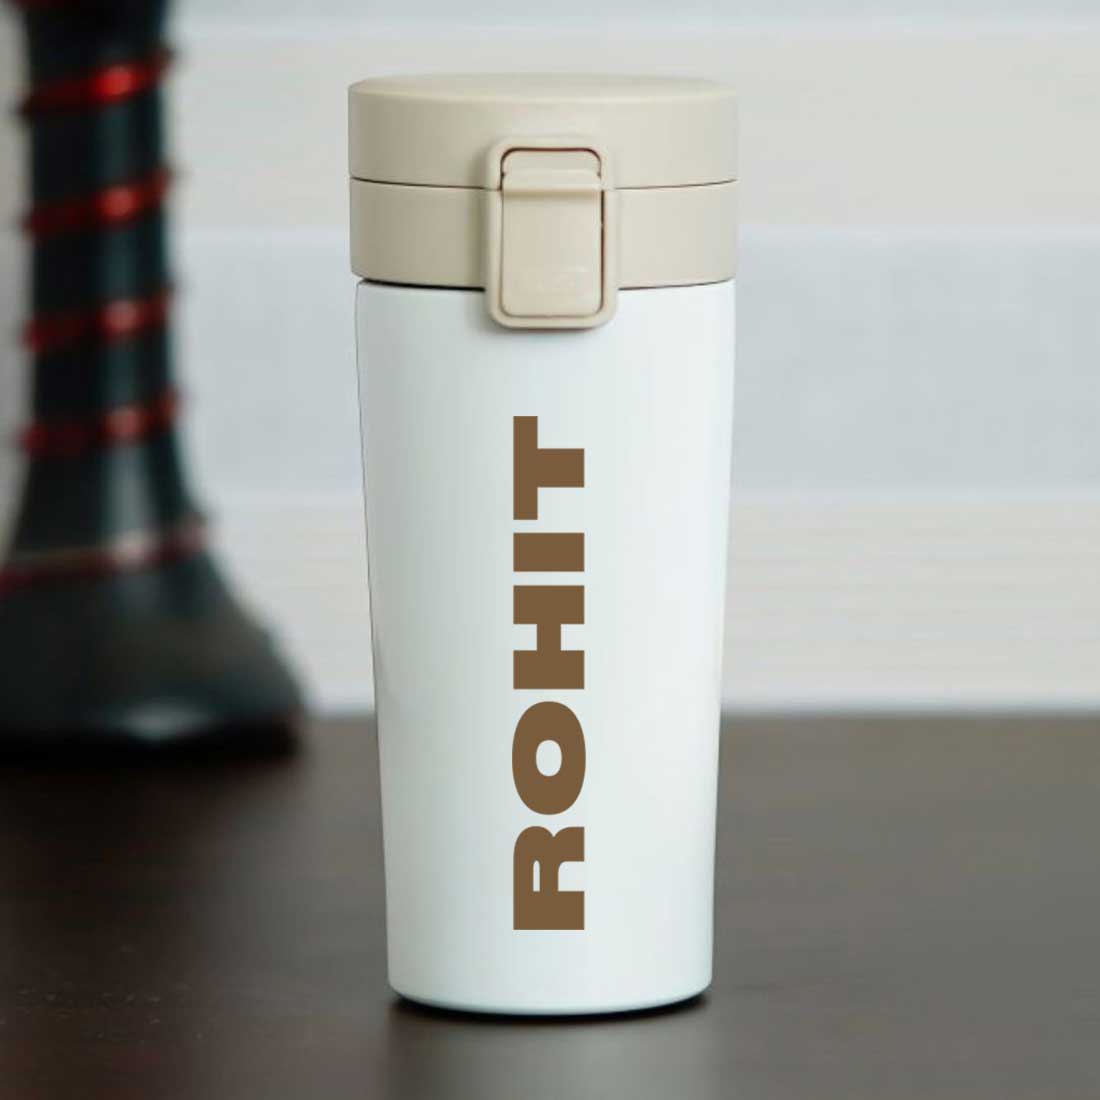 Customized Coffee Tumbler With Lid Travel Flask for Tea (350 ML) - Add Name